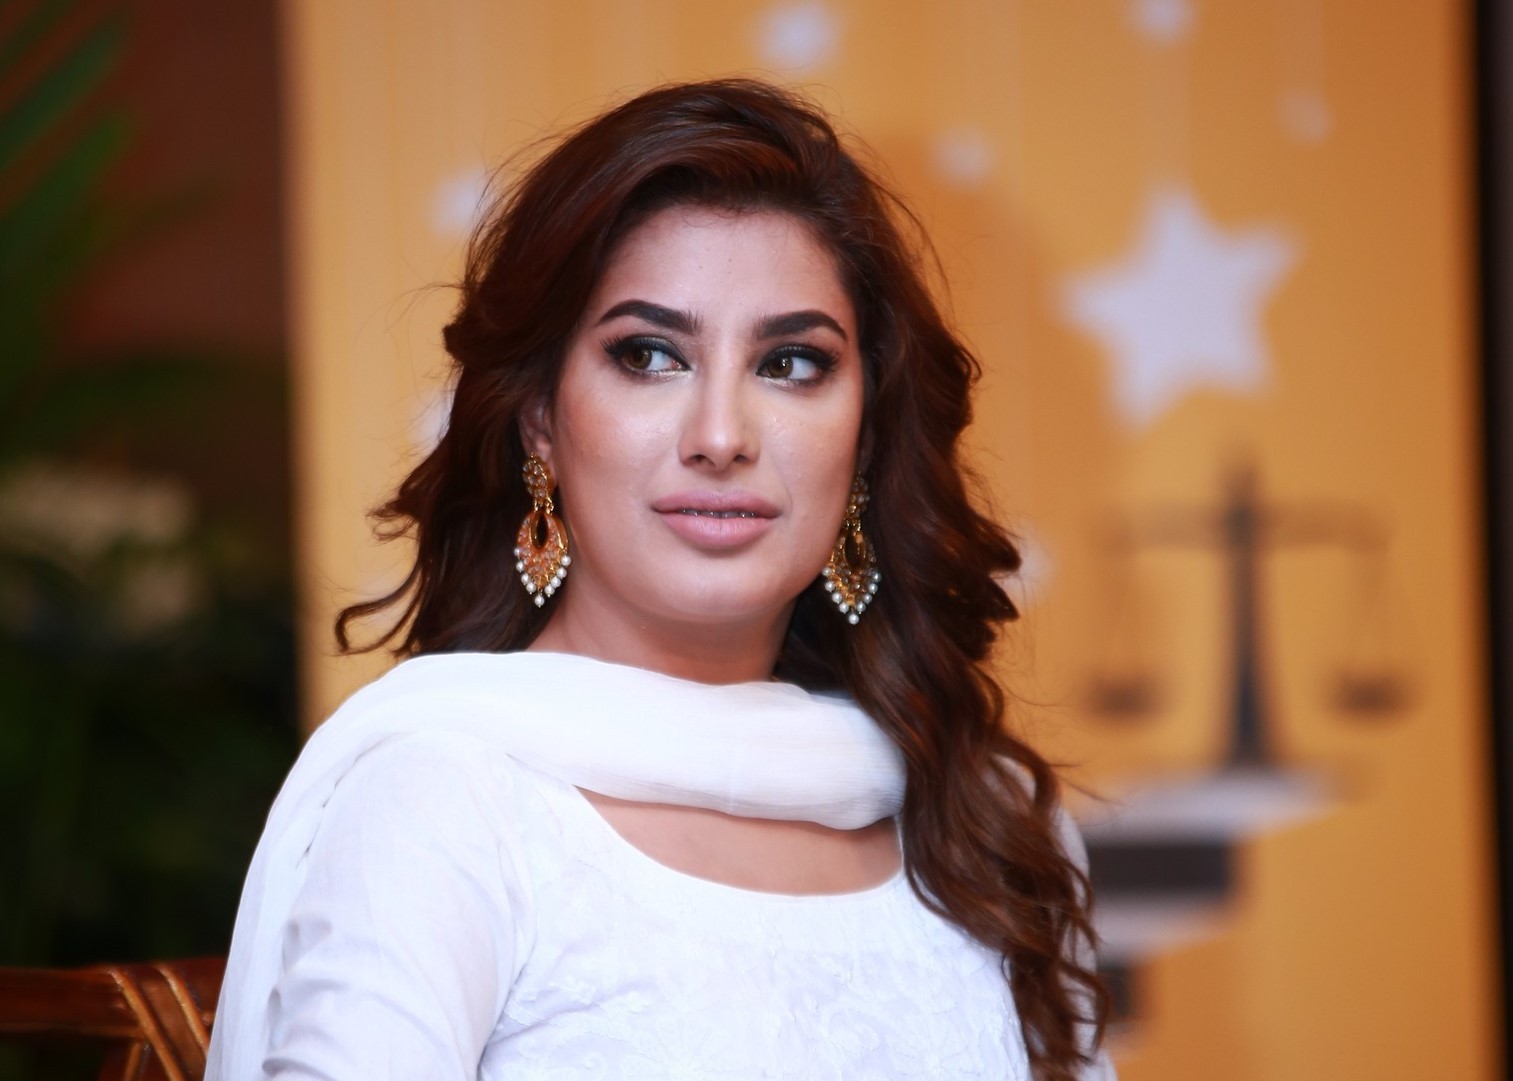 Mehwish Hayat - The renowned actress Mehwish Hayat has reportedly been tested positive for the Novel Coronavirus (COVID-19). However, it has yet to be ascertained by the actress herself whether she has been diagnosed with the virus or not. The 37-year-old Mehwish Hayat is known for her roles in ‘Punjab Nahi Jaungi’, ‘Load Wedding’, and ‘Actor in Law’ for which she also bagged various awards. Mehwish Hayat was also conferred Tamgha-e-Imtiaz on March 23, 2019 for her contribution to Pakistani Cinema by President Dr. Arif Alvi. Earlier the veteran actresses Robina Asharf, Sakina Samo and Nida Yasir also contracted the virus and self-quarantined themselves.